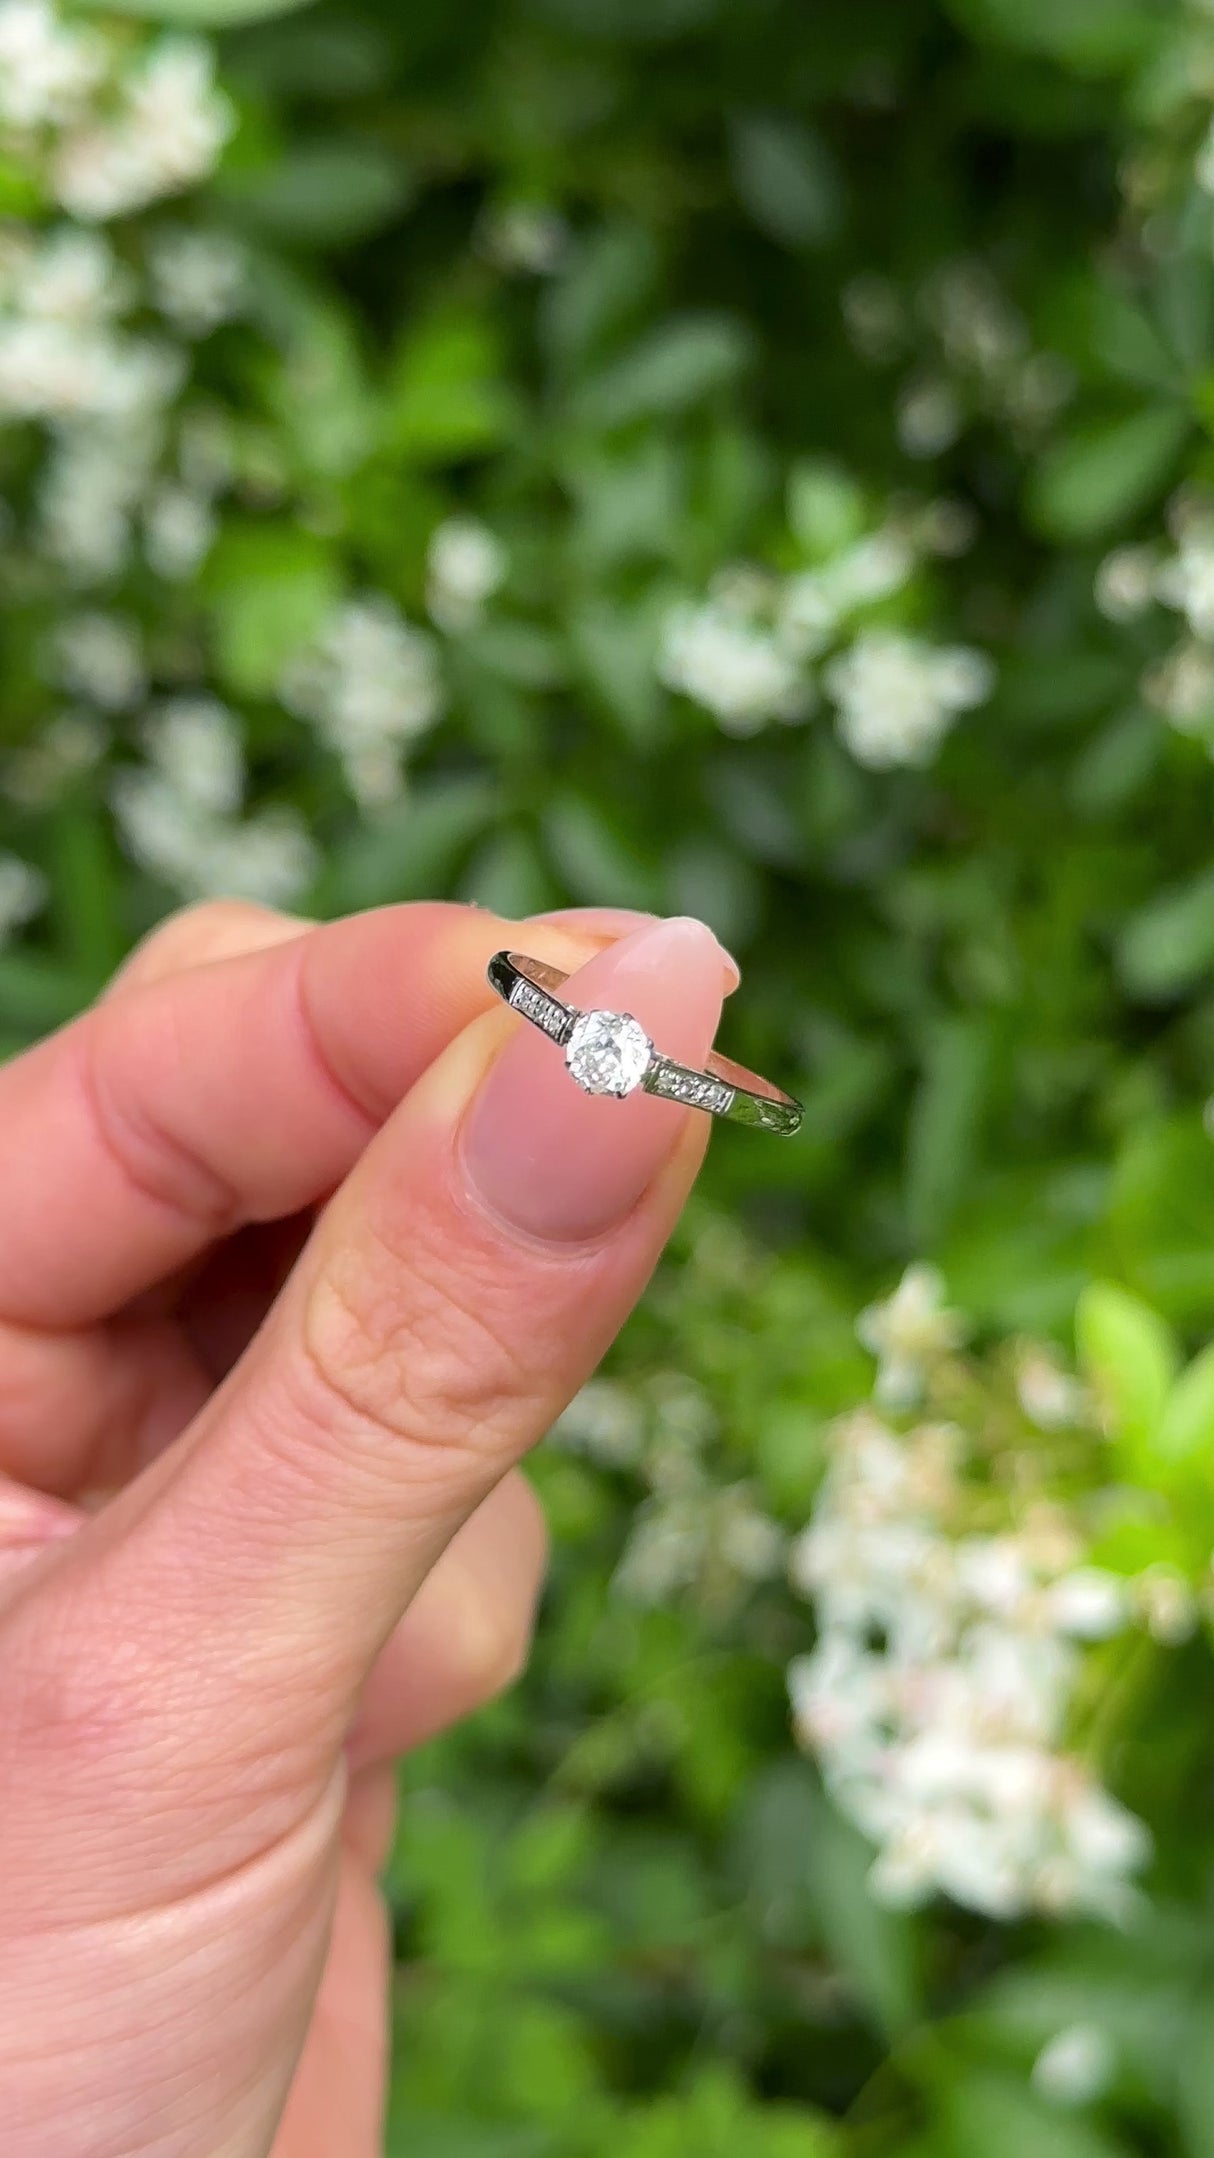 Antique, Edwardian solitaire diamond engagement ring, 18ct white gold and platinum